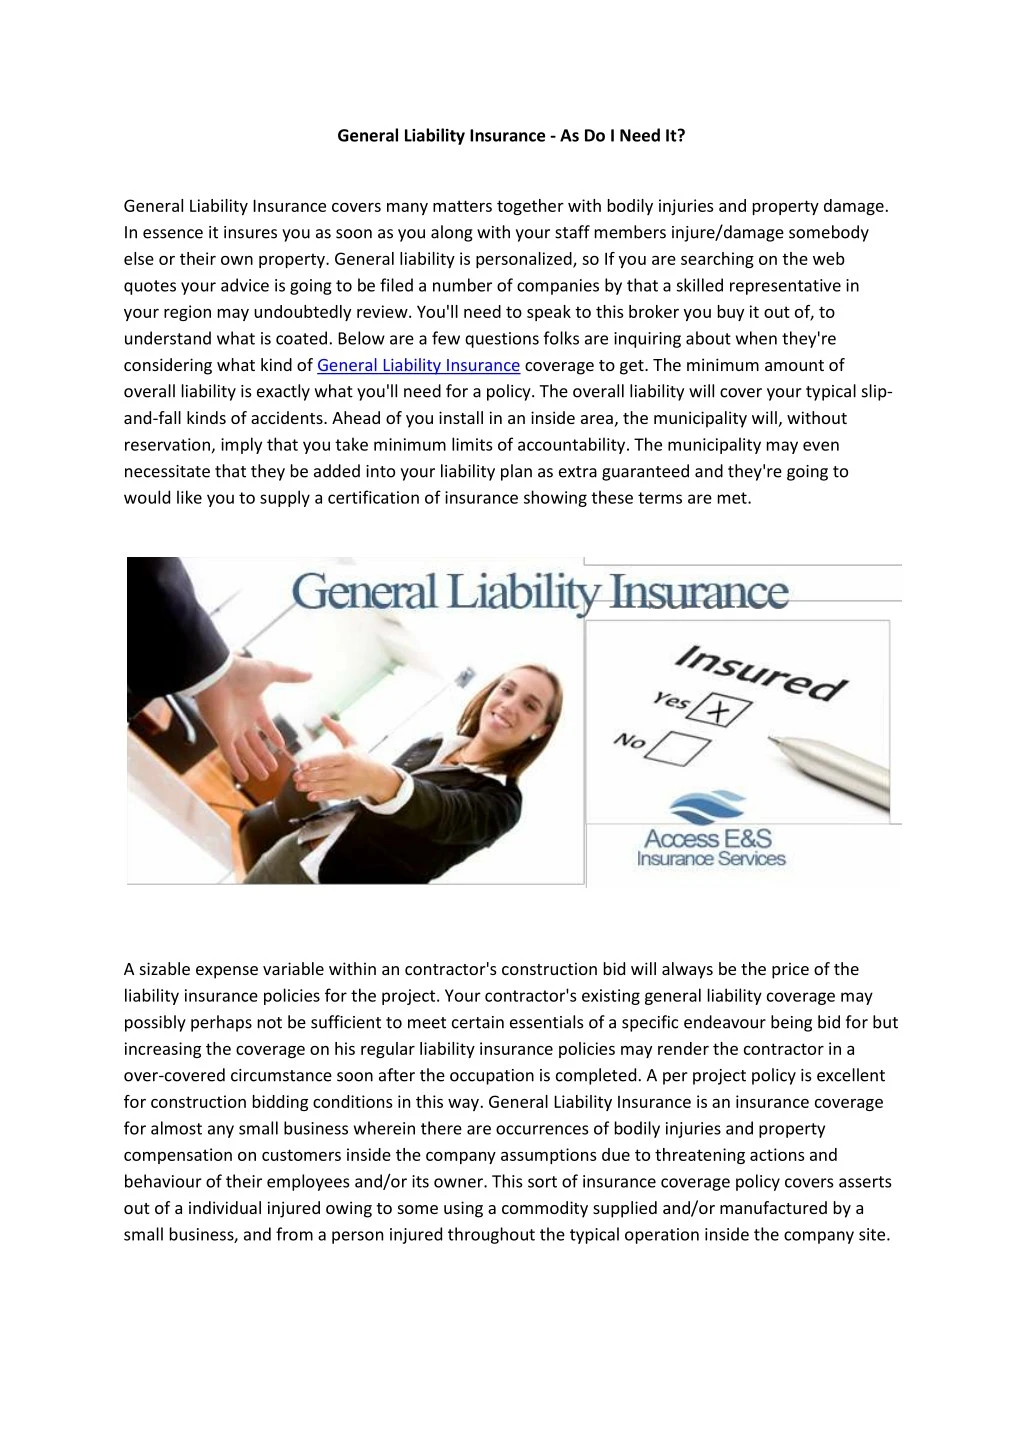 general liability insurance as do i need it